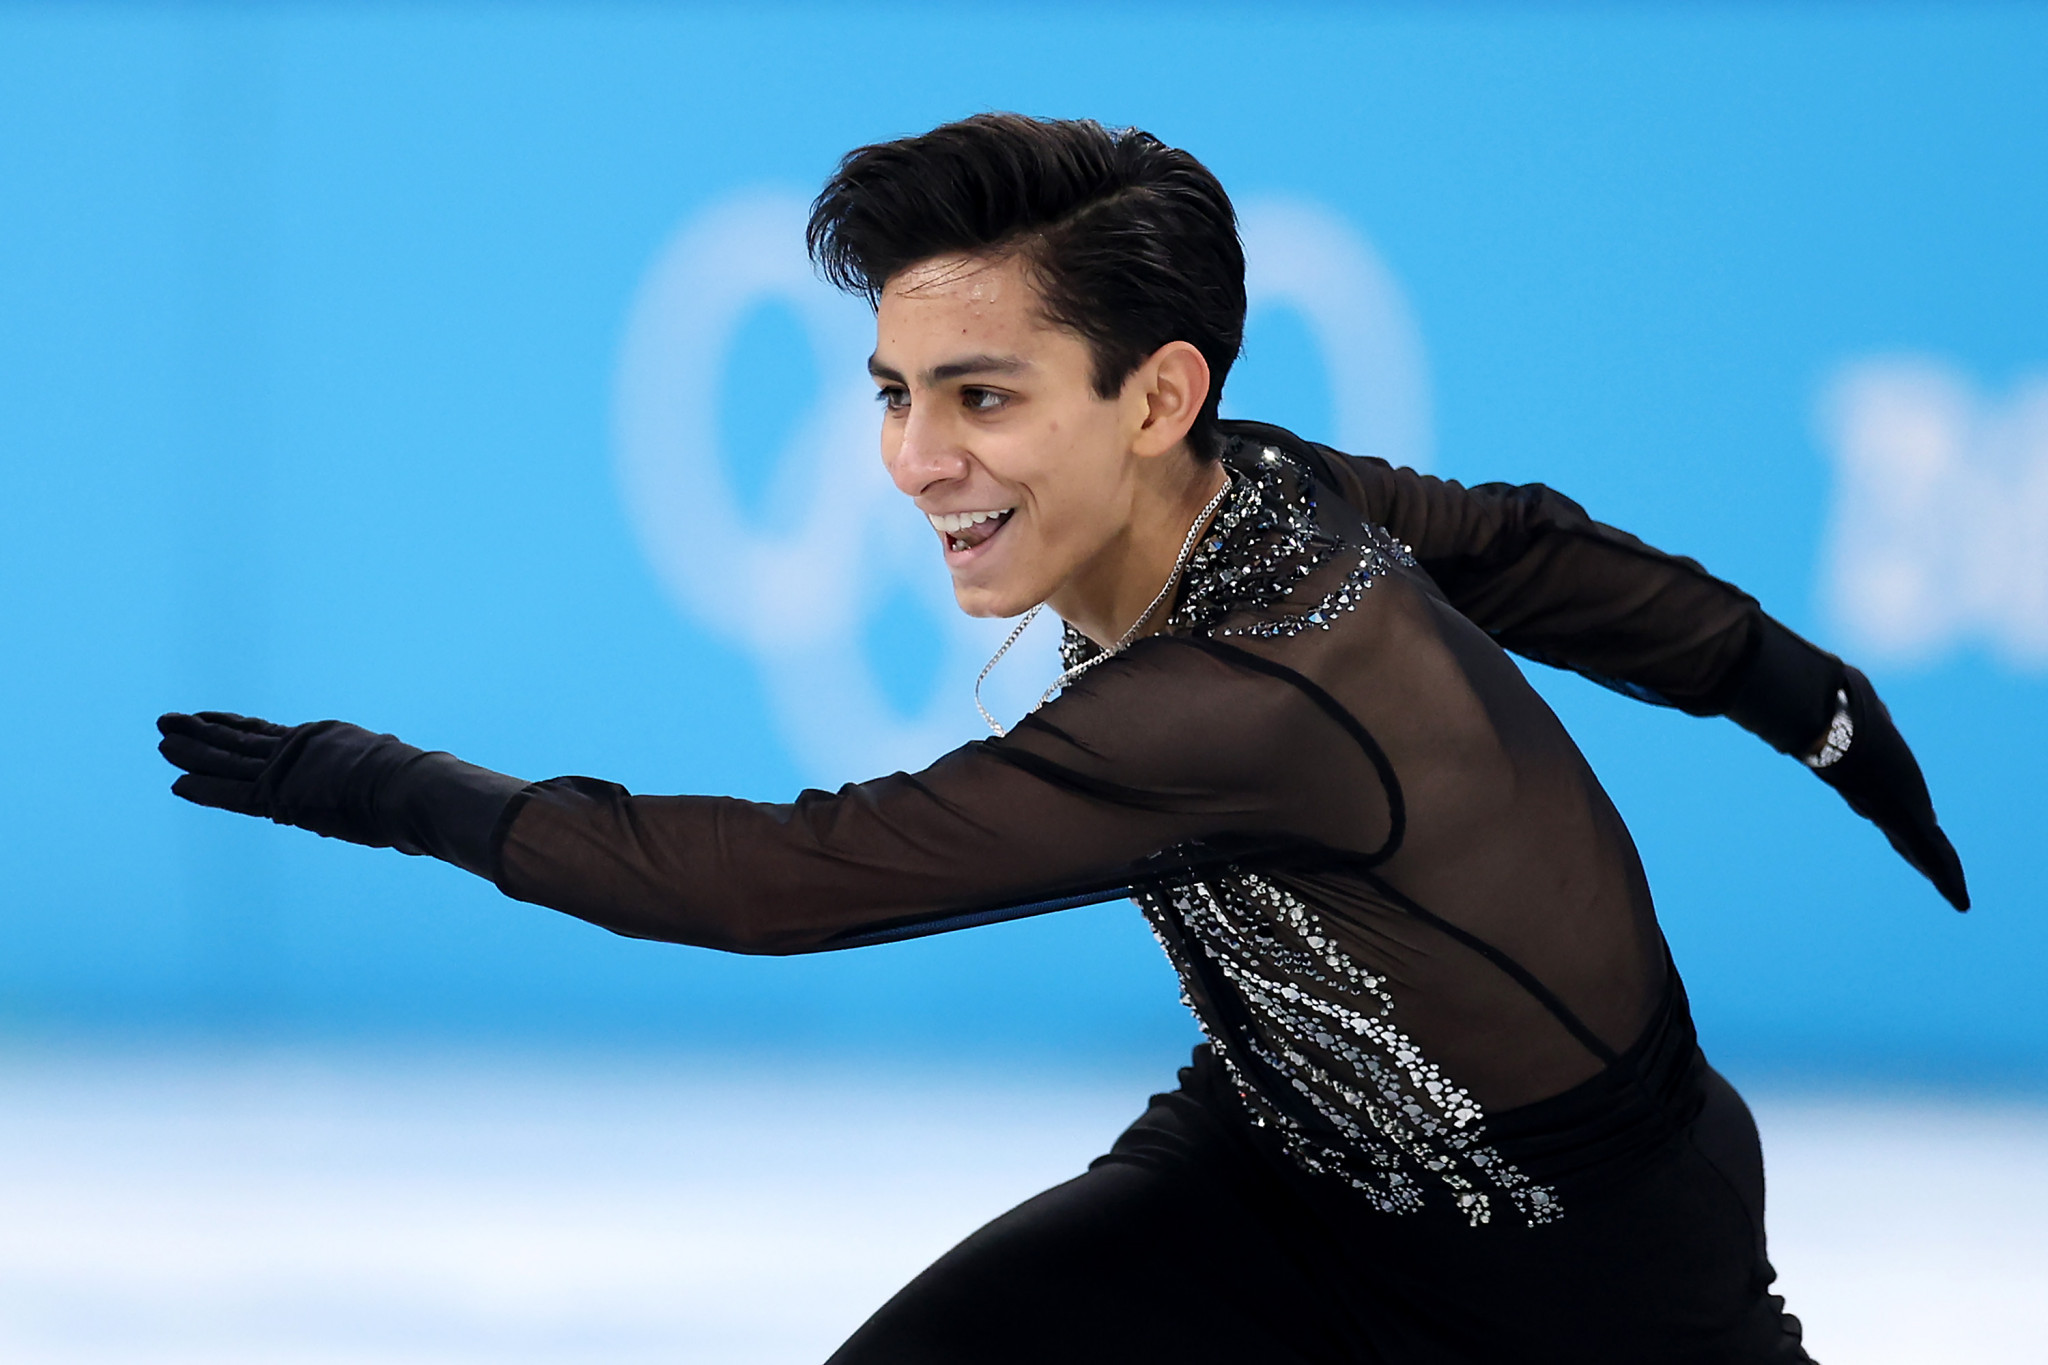 Mexican Olympian Donovan Carillo helped promote World Ice Skating Day in Nuevo Leon, Mexico ©Getty Images